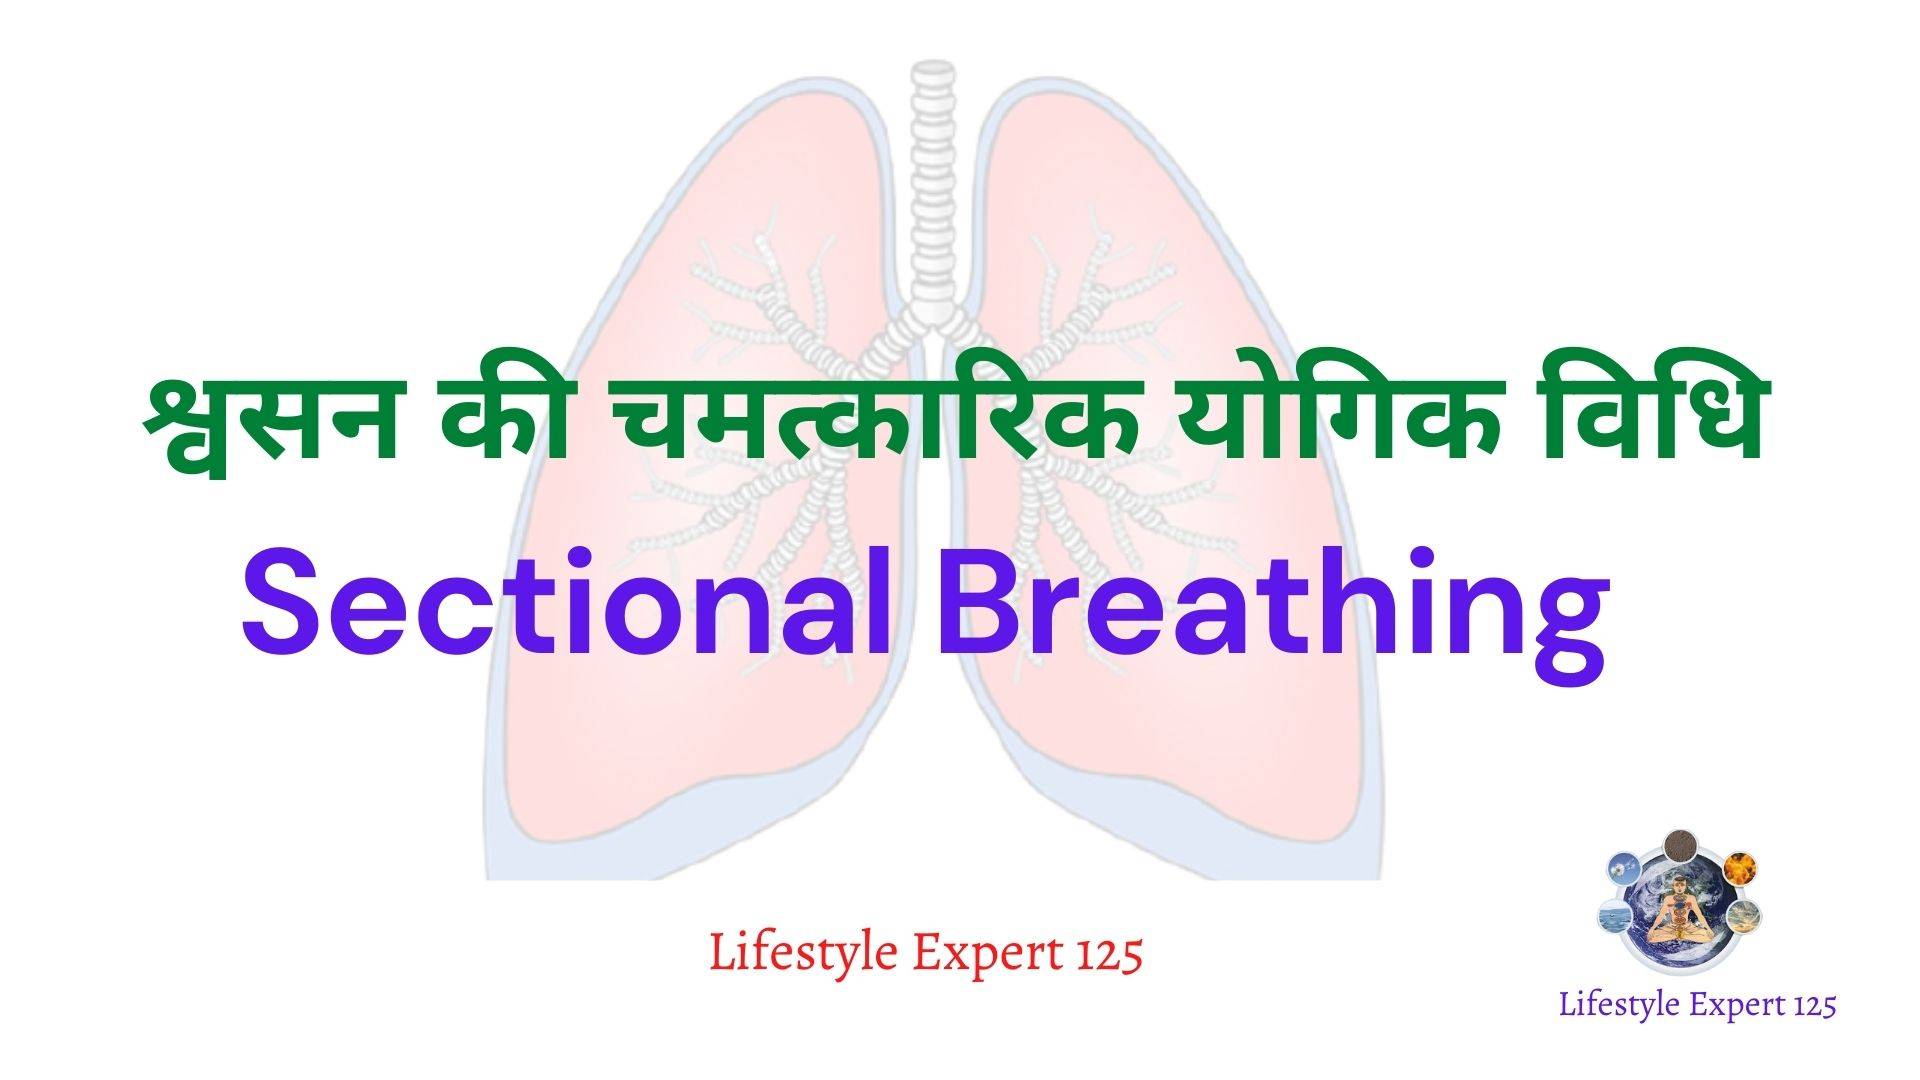 Sectional Breathing